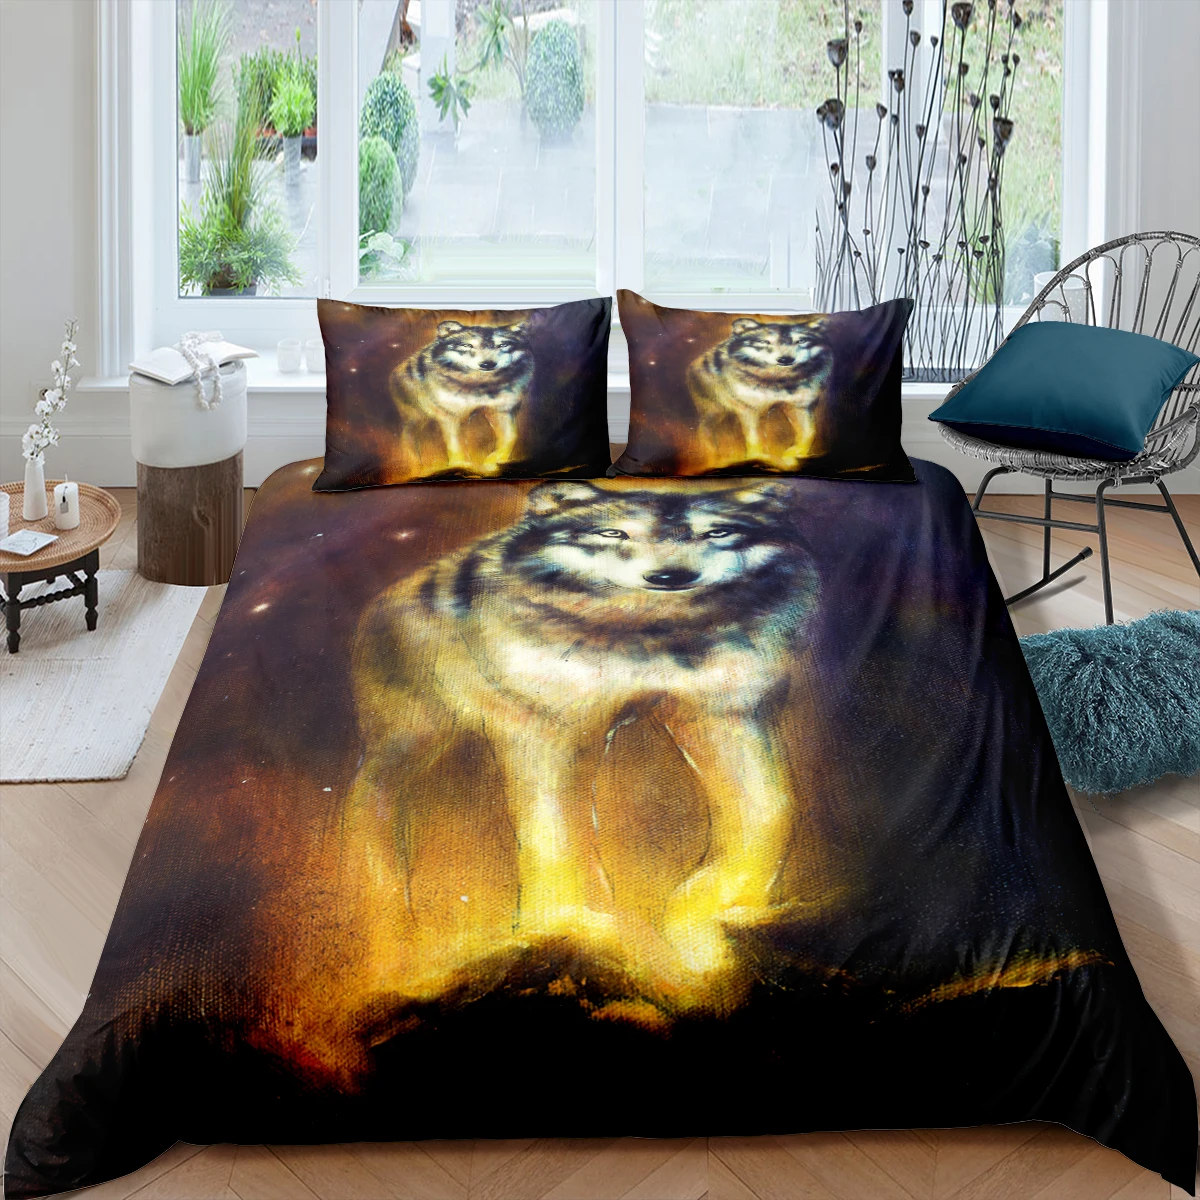 

Animal Fashoin 3D Print Comforter Luxury Twin Queen King Single Size Duvet Cover Set Home Textile Decor Cool Wolf Bedding Set